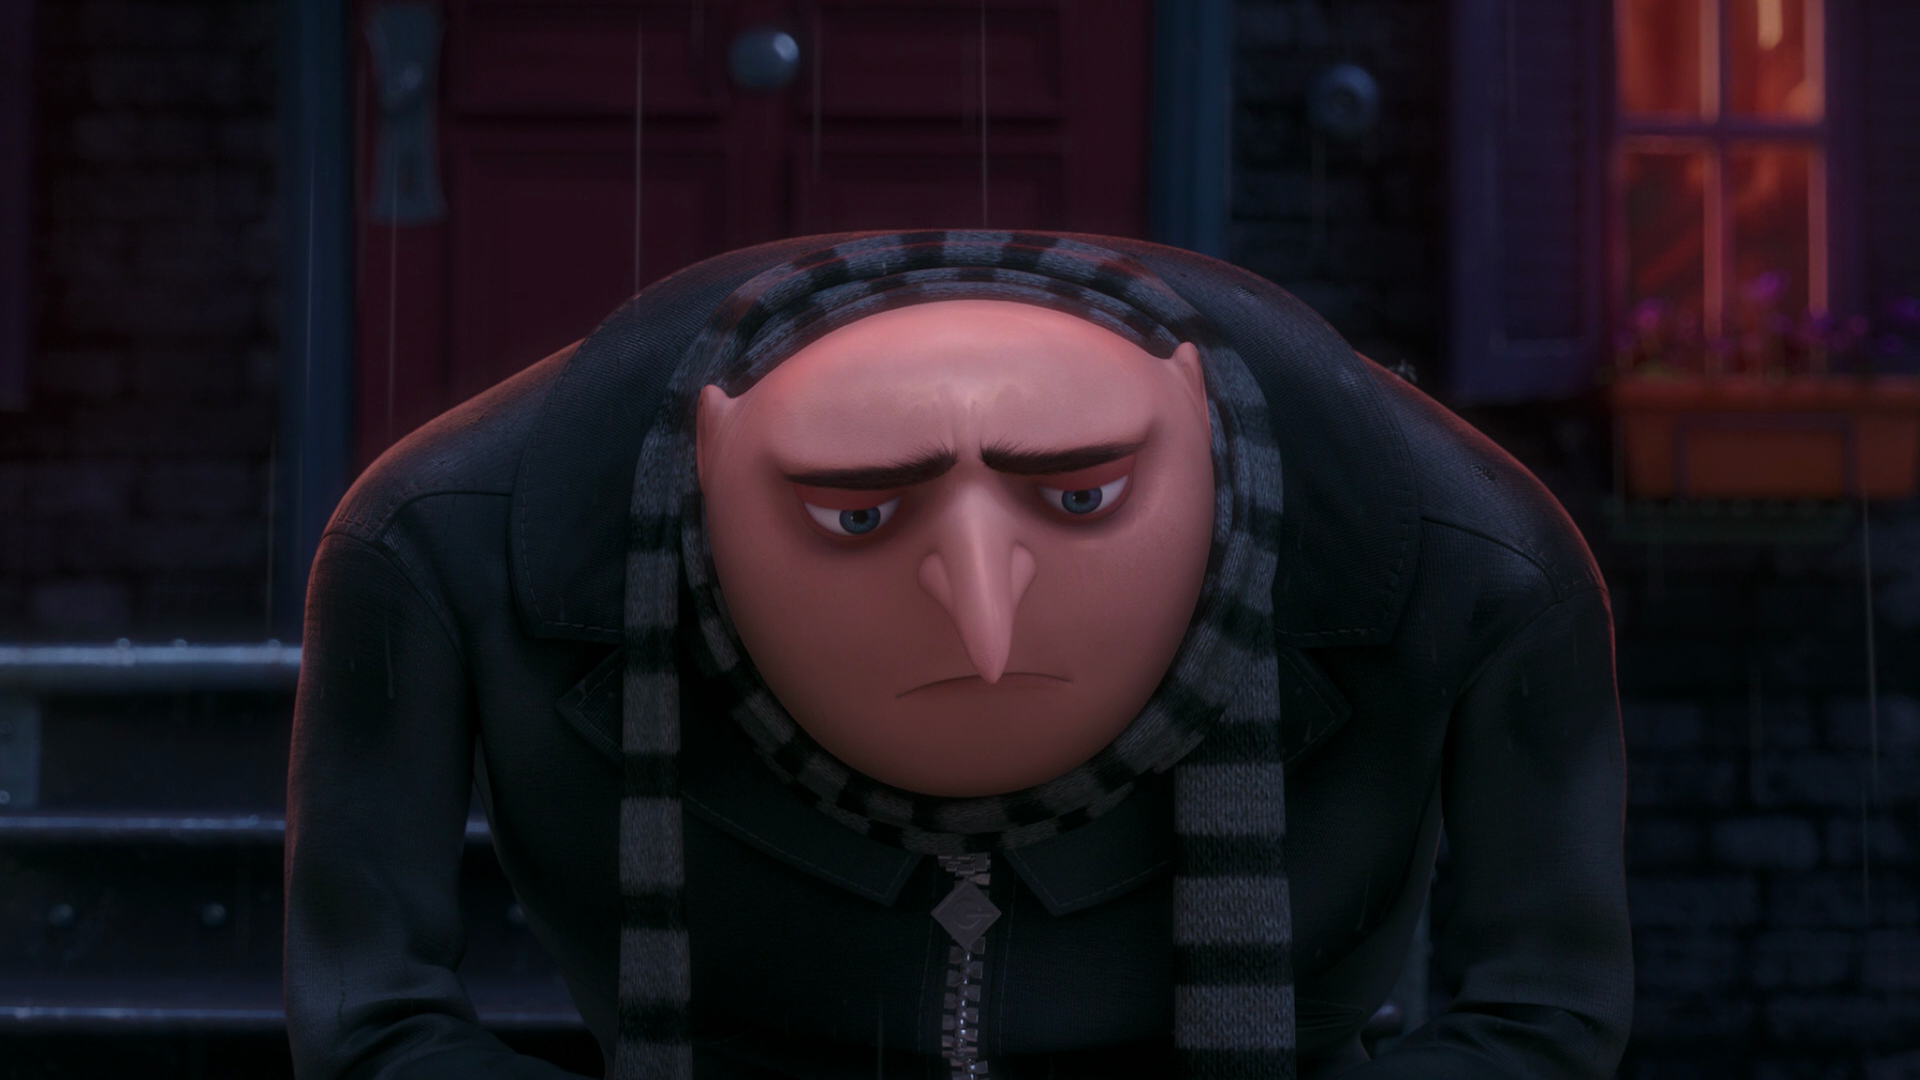 Despicable Me 2 for mac instal free